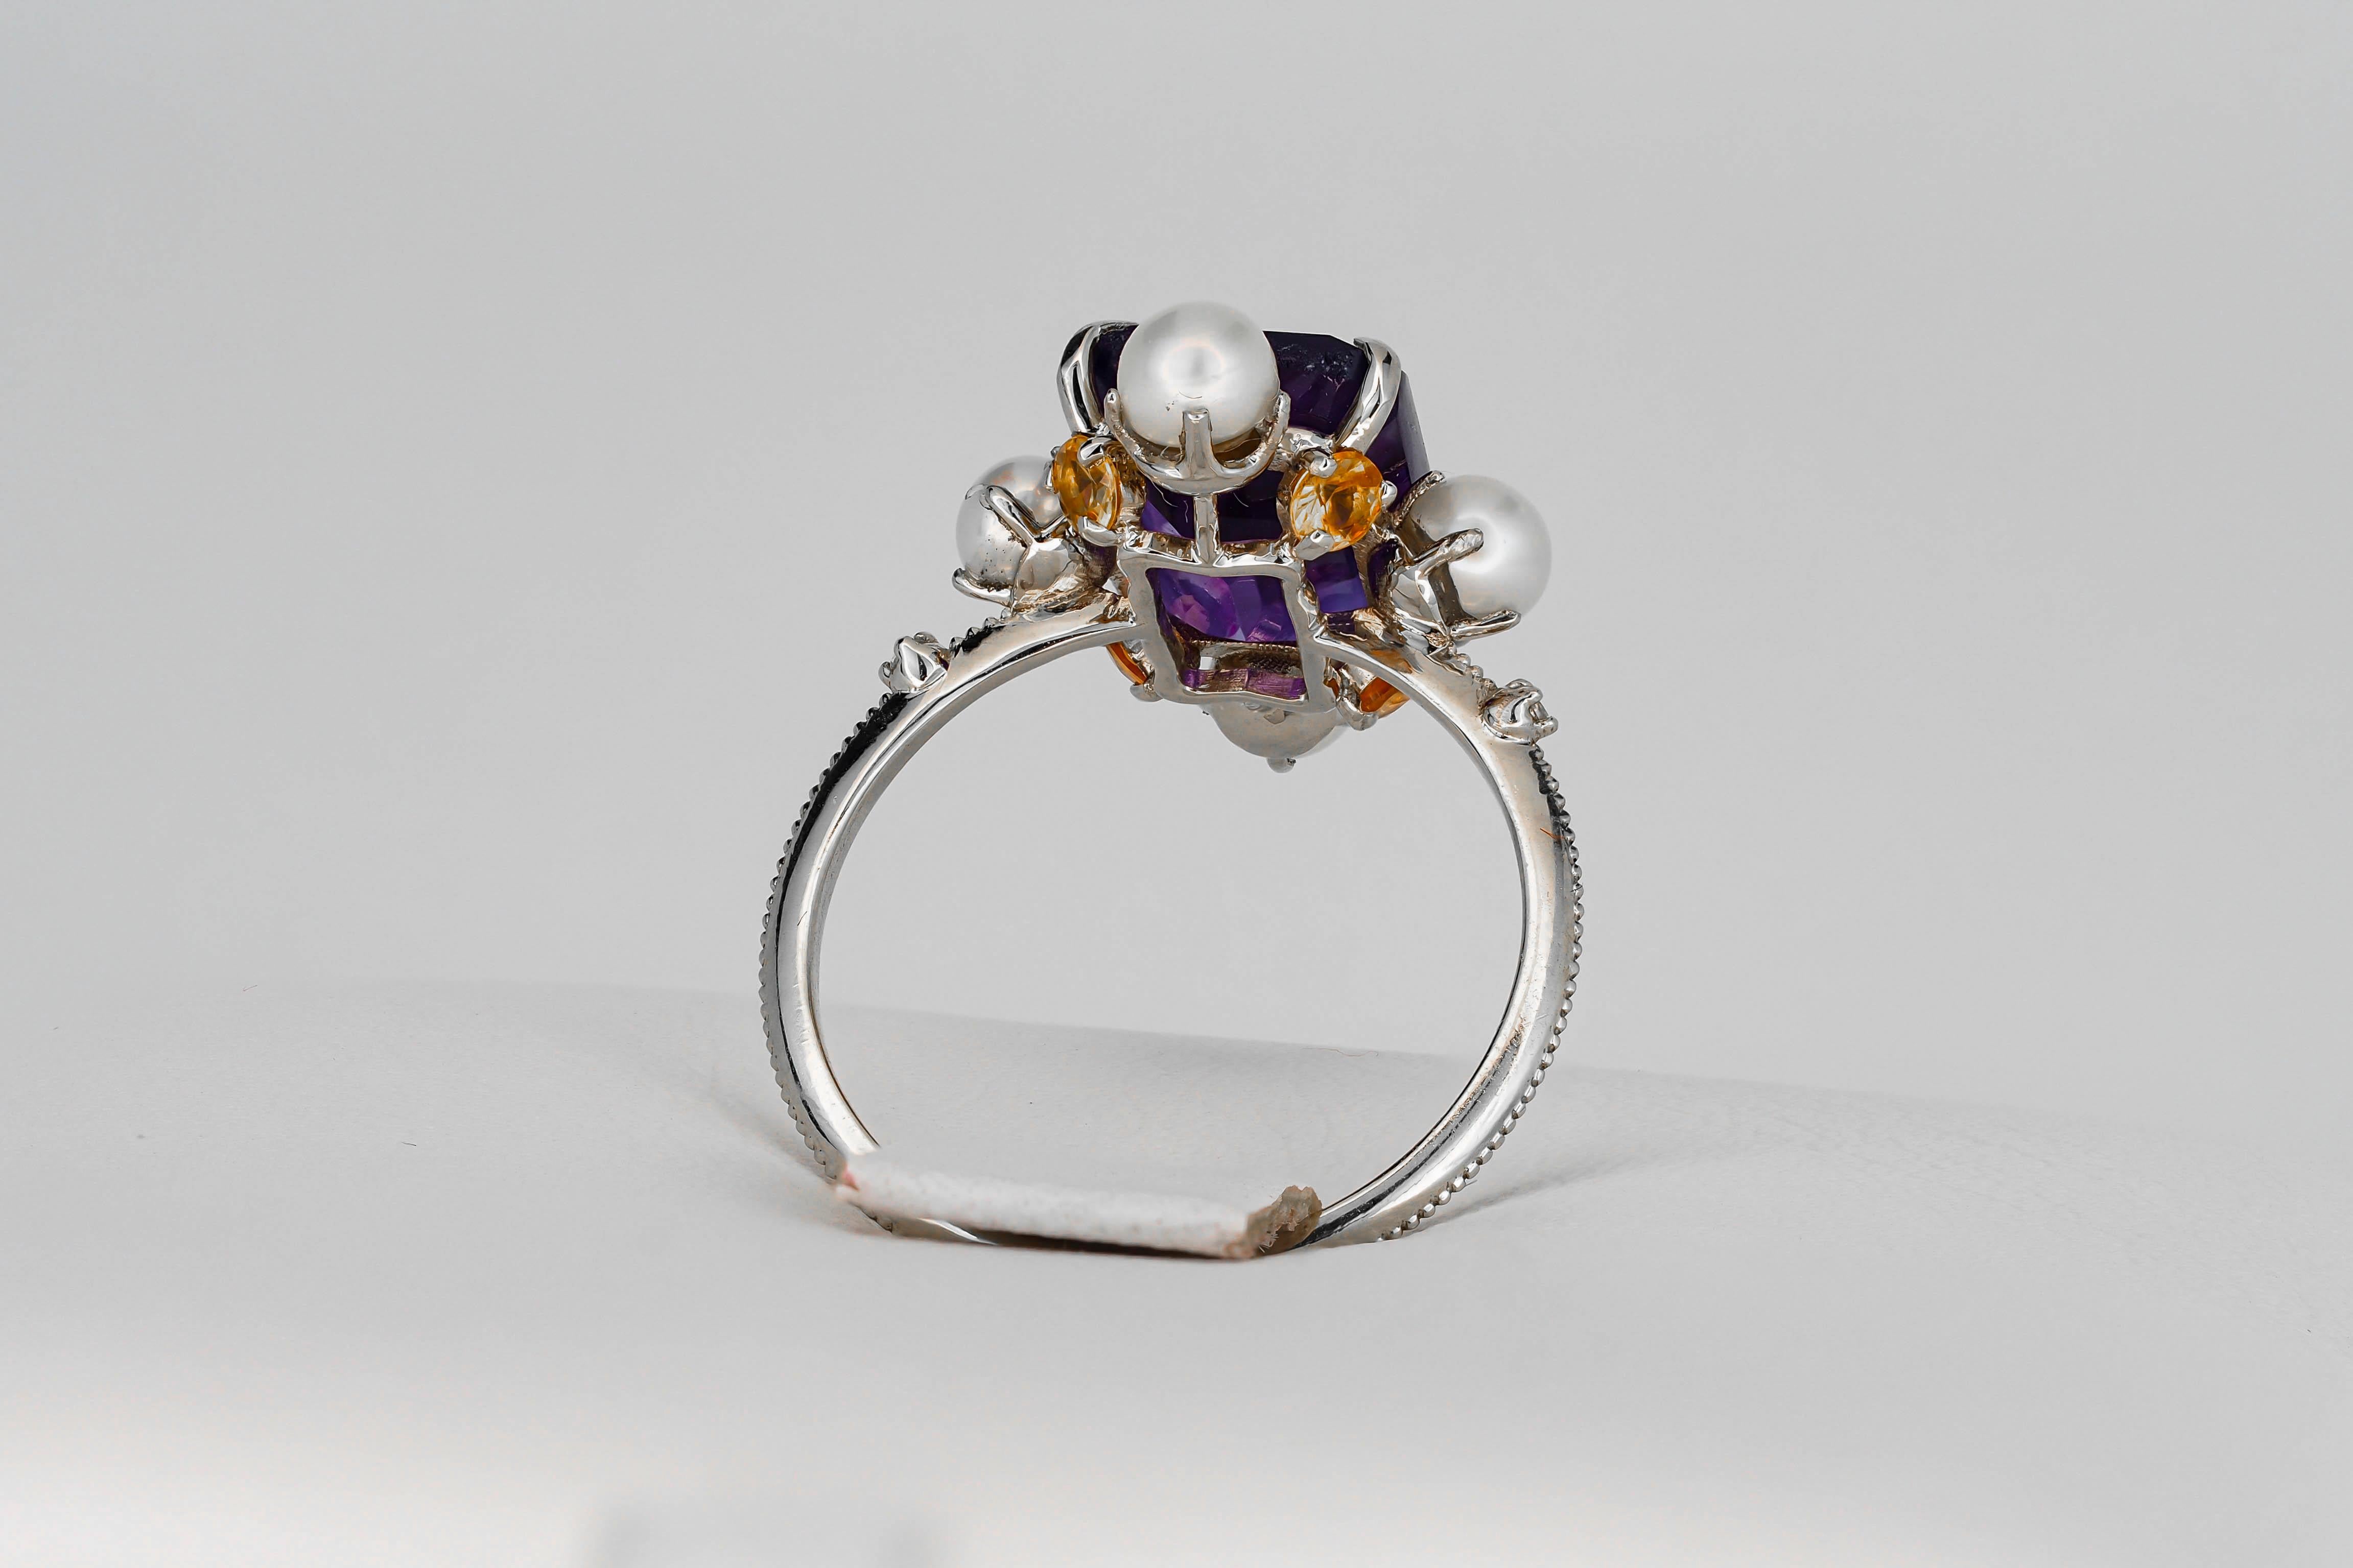 For Sale:  Amethyst ring in 14k gold.  9